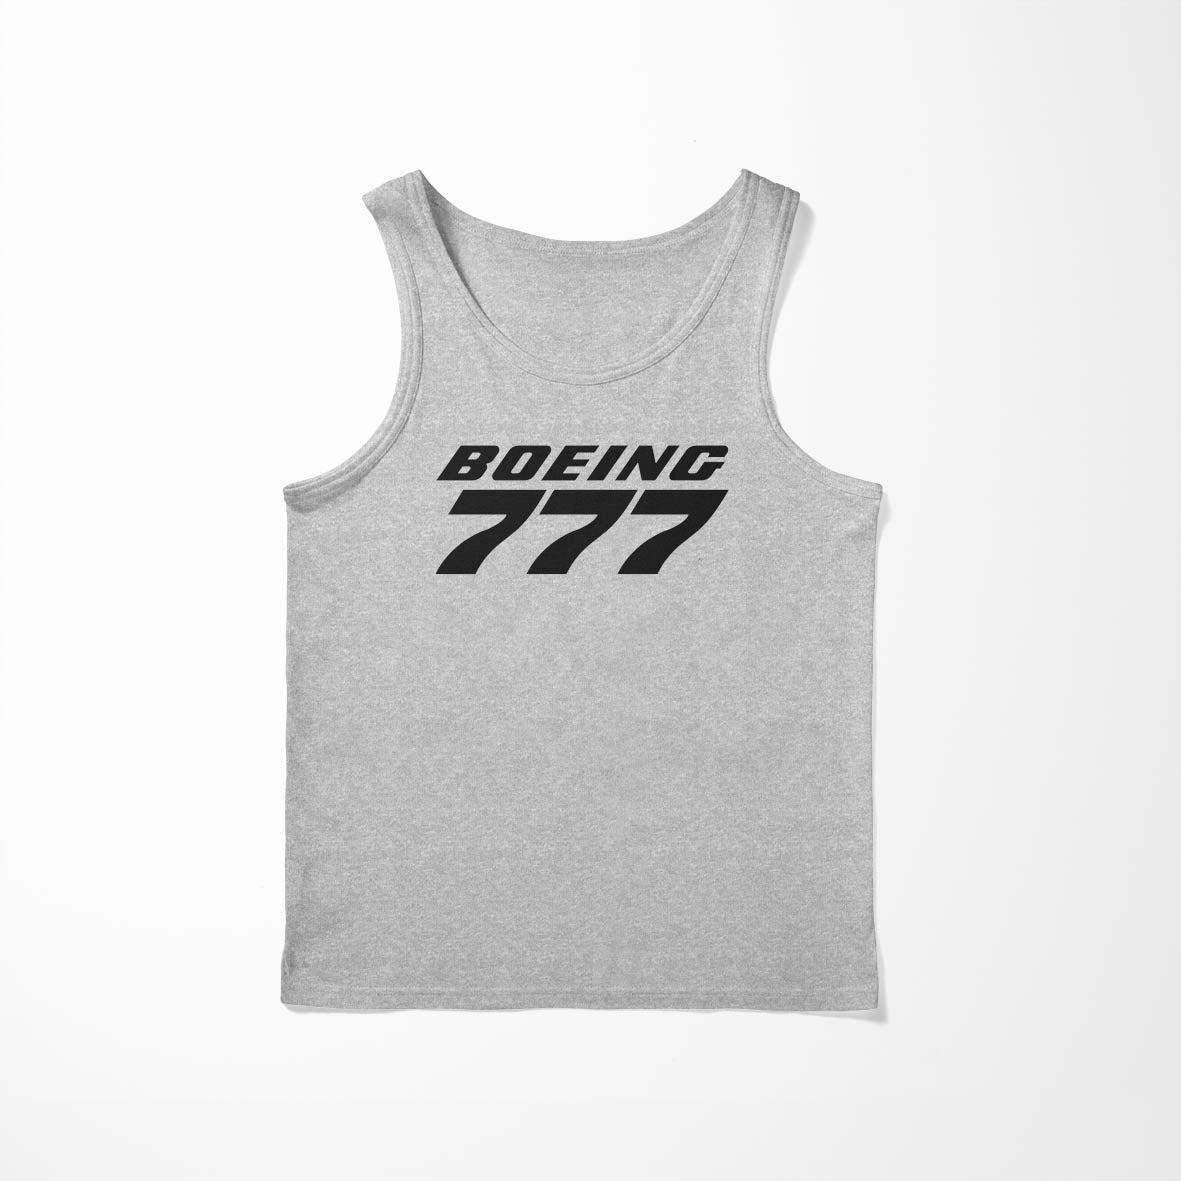 Boeing 777 & Text Designed Tank Tops